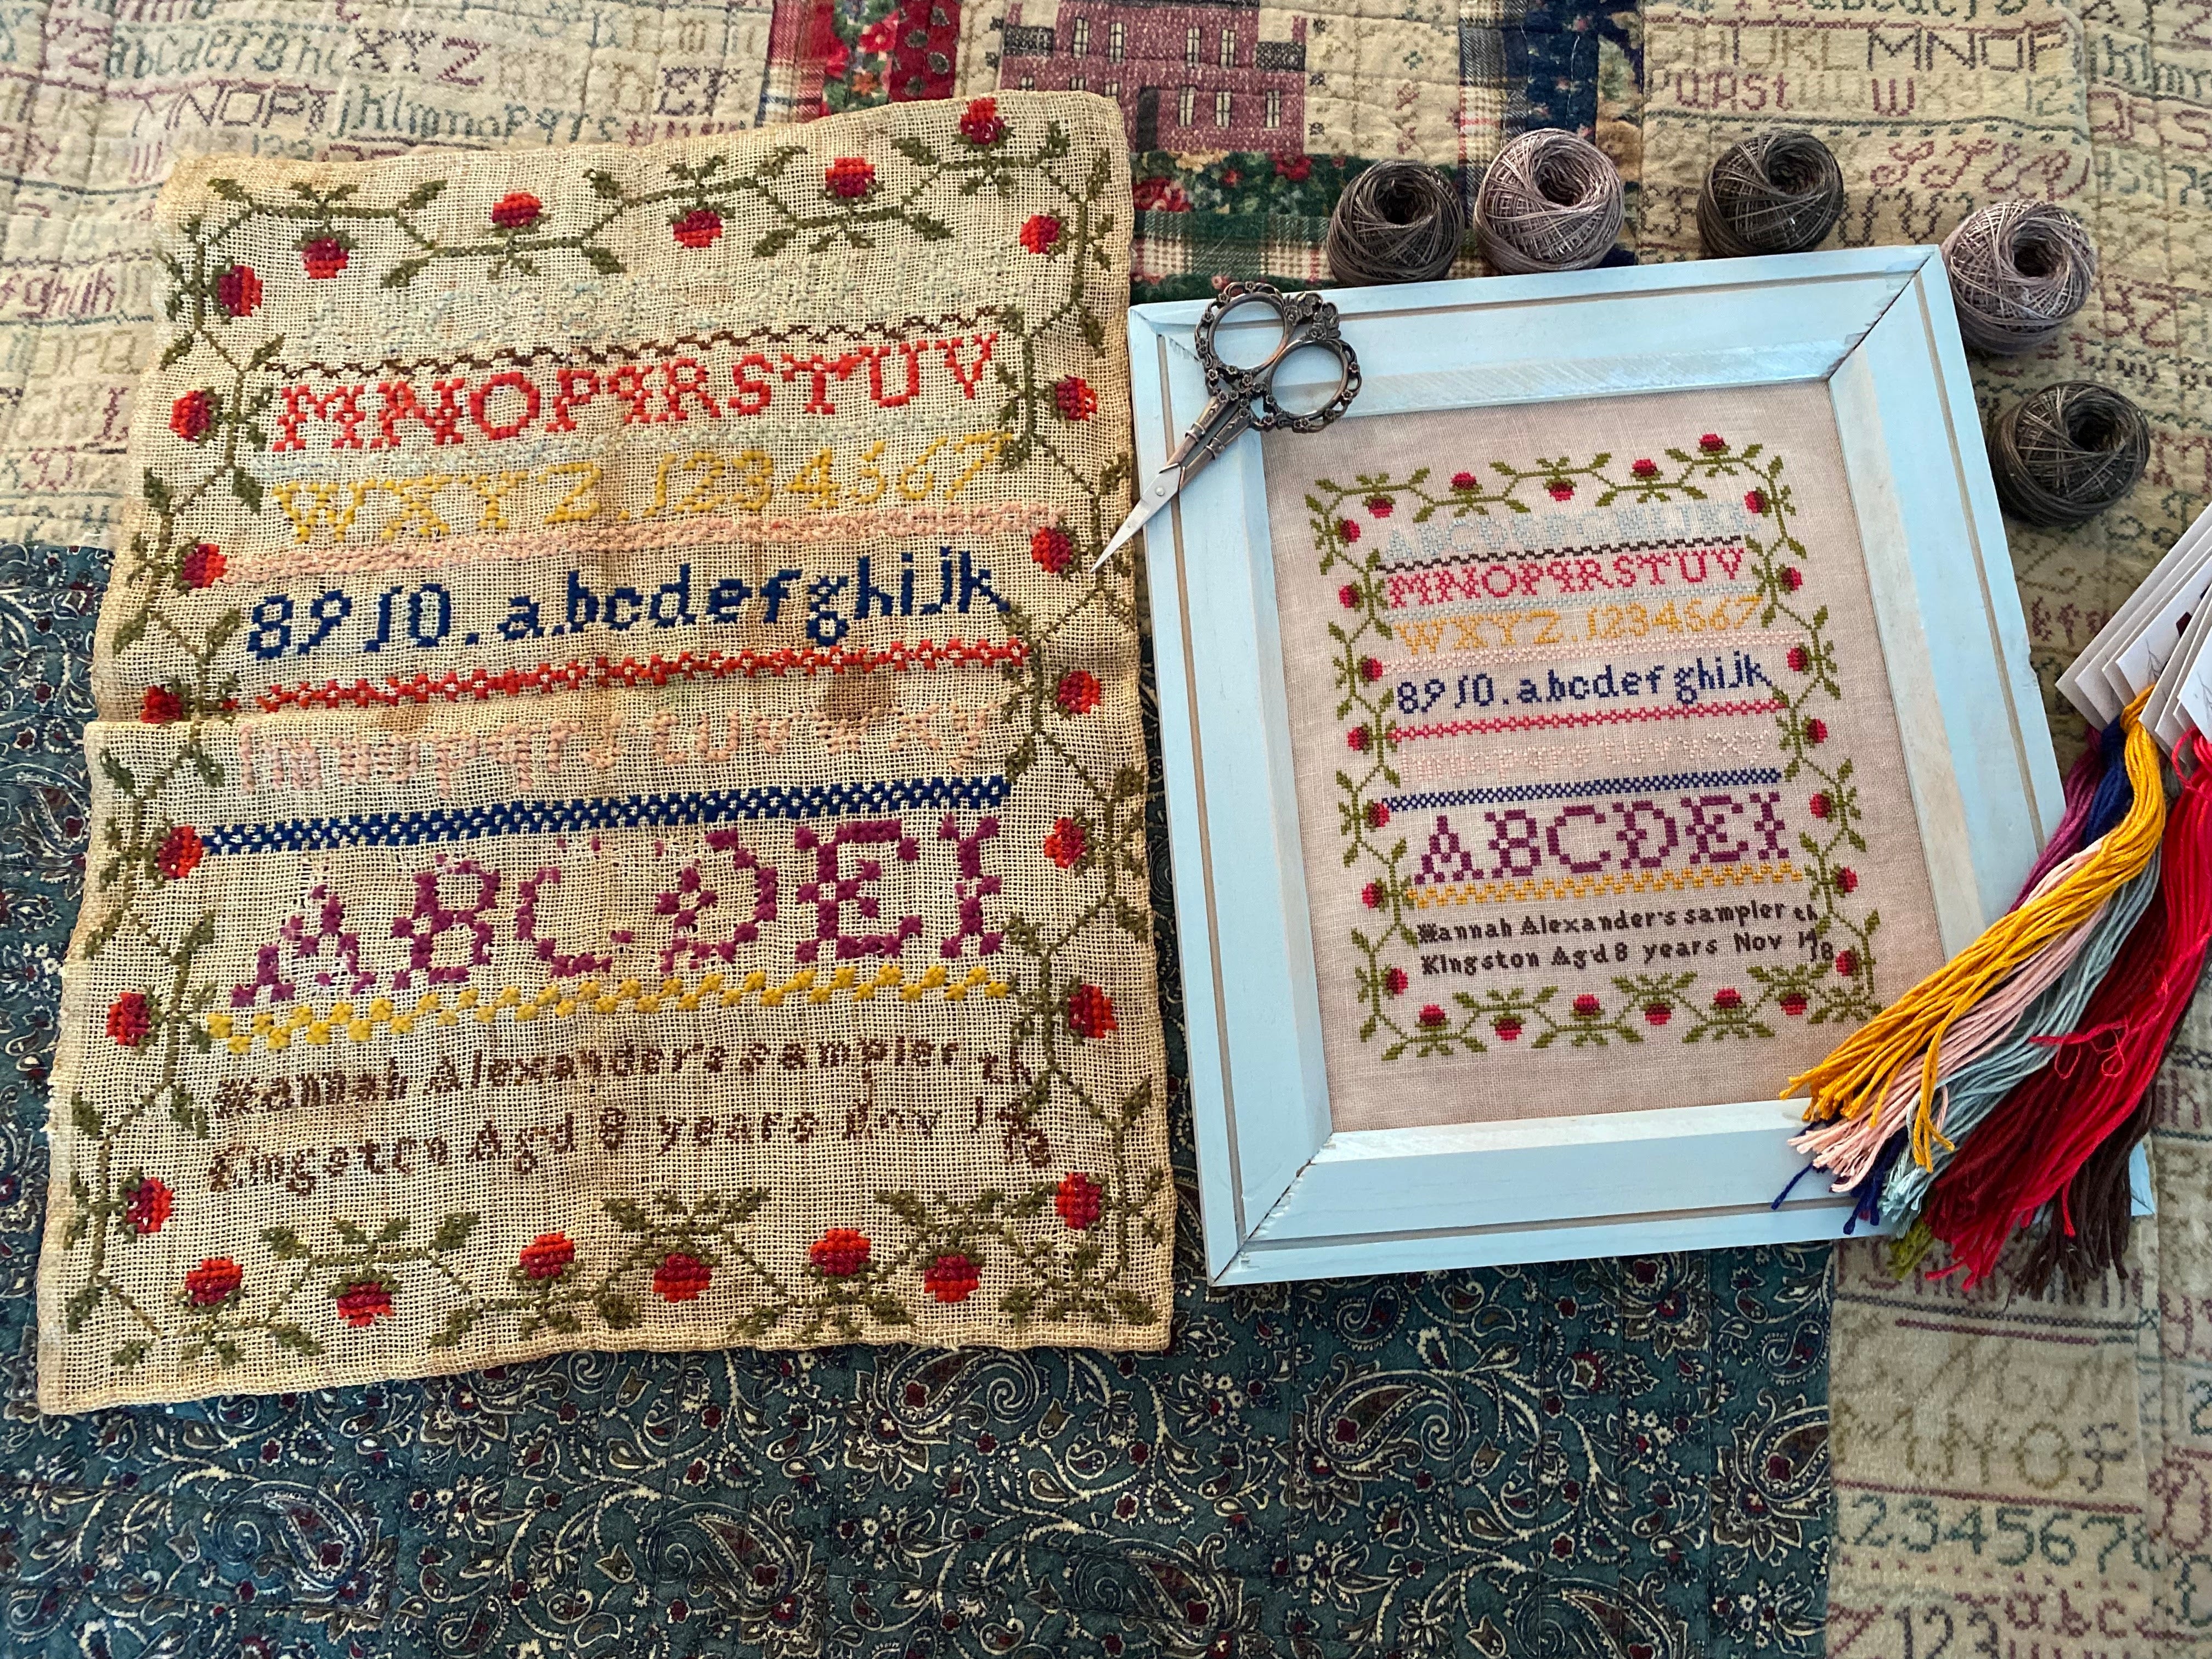 Hannah Alexander: A Sweet Little Sampler | Pansy Patch Quilts and Stitchery